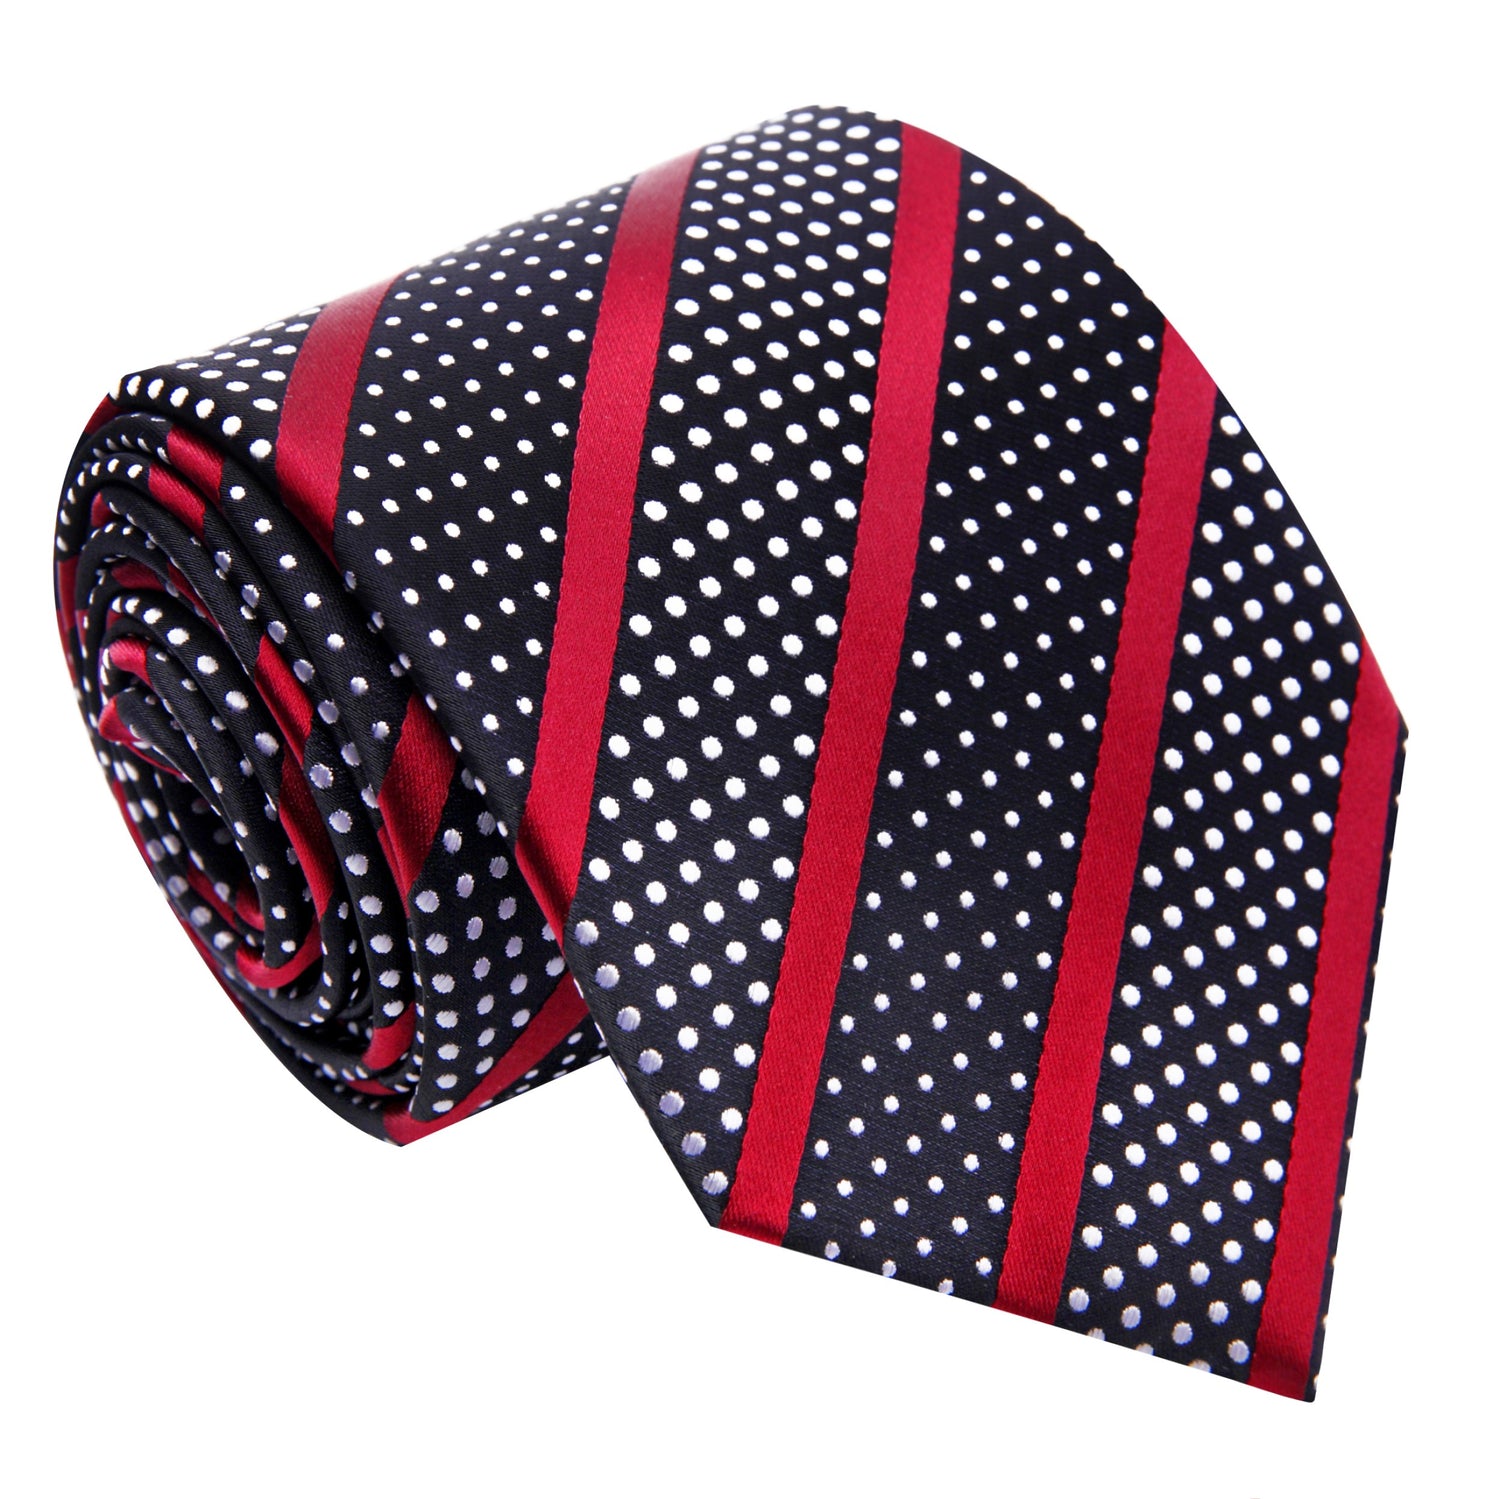 Black, Red, White with Stripes Tie 